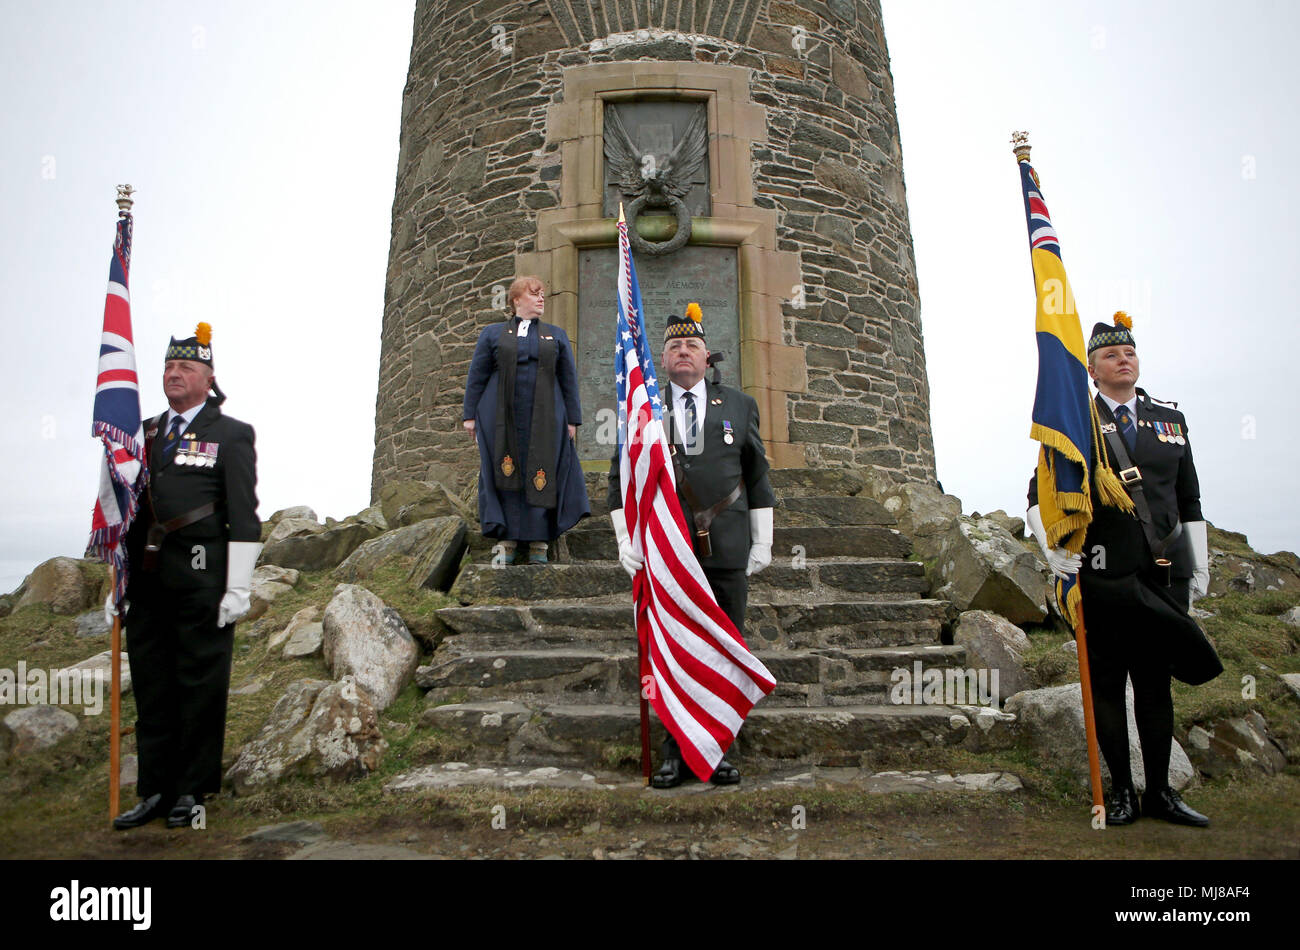 A service takes place at the American Moment at the Mull of Oa on Islay, to remember around 700 First World War soldiers who lost their lives in the sinking of two US ships off the coast of the small Scottish island. Stock Photo